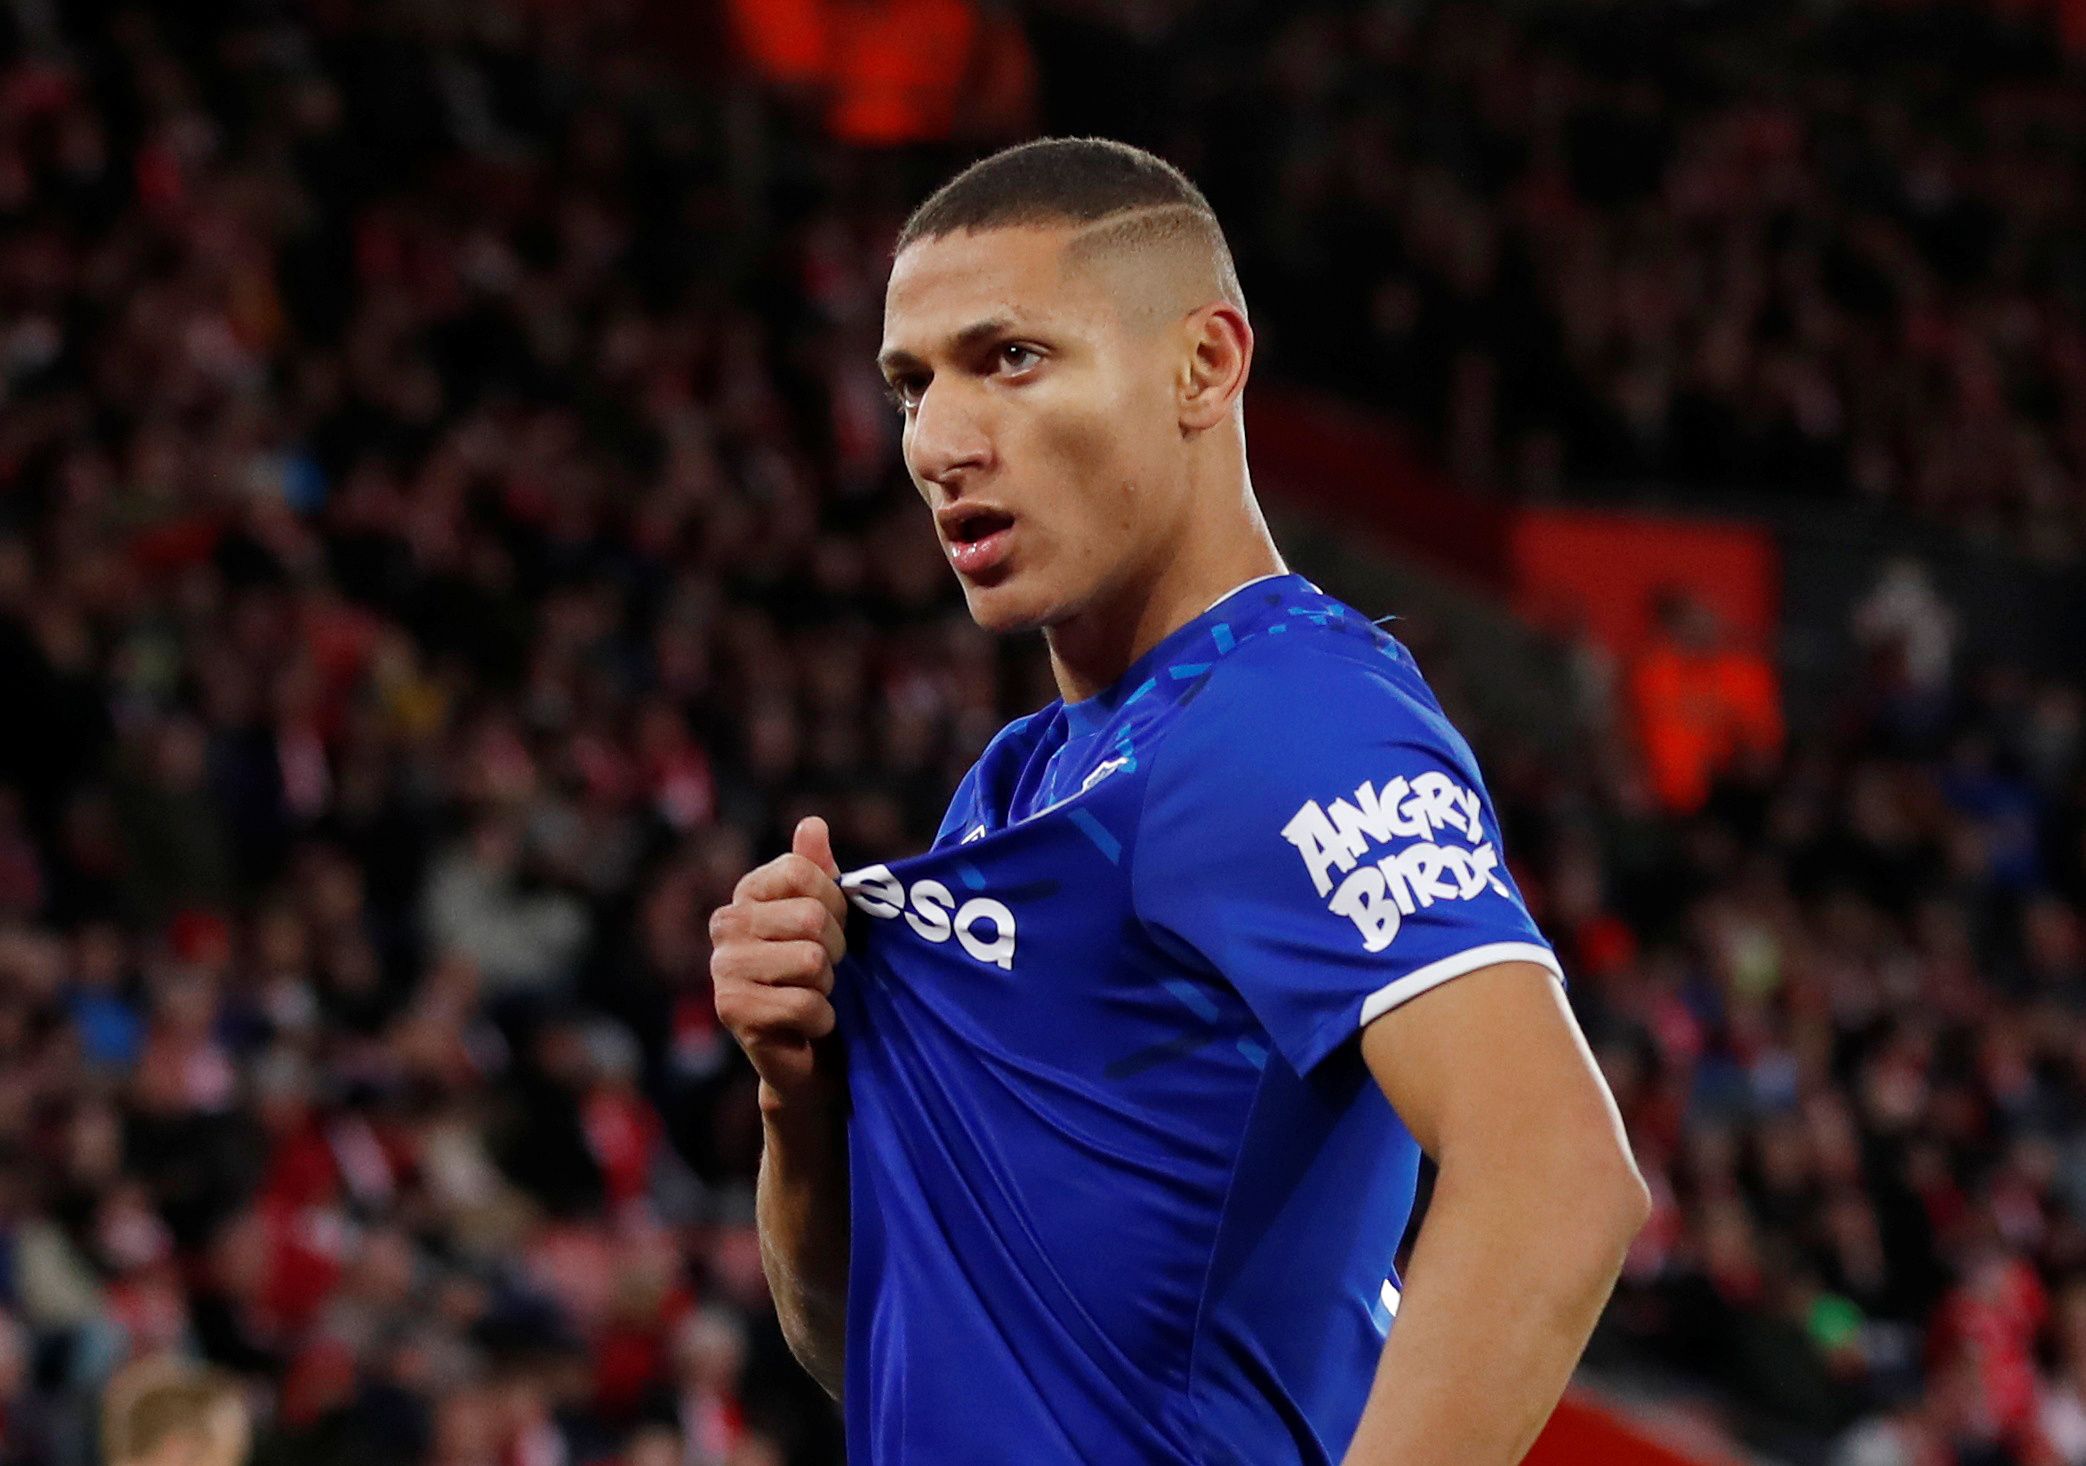 Soccer Football - Premier League - Southampton v Everton - St Mary's Stadium, Southampton, Britain - November 9, 2019  Everton's Richarlison celebrates scoring their second goal              REUTERS/David Klein  EDITORIAL USE ONLY. No use with unauthorized audio, video, data, fixture lists, club/league logos or "live" services. Online in-match use limited to 75 images, no video emulation. No use in betting, games or single club/league/player publications.  Please contact your account representat